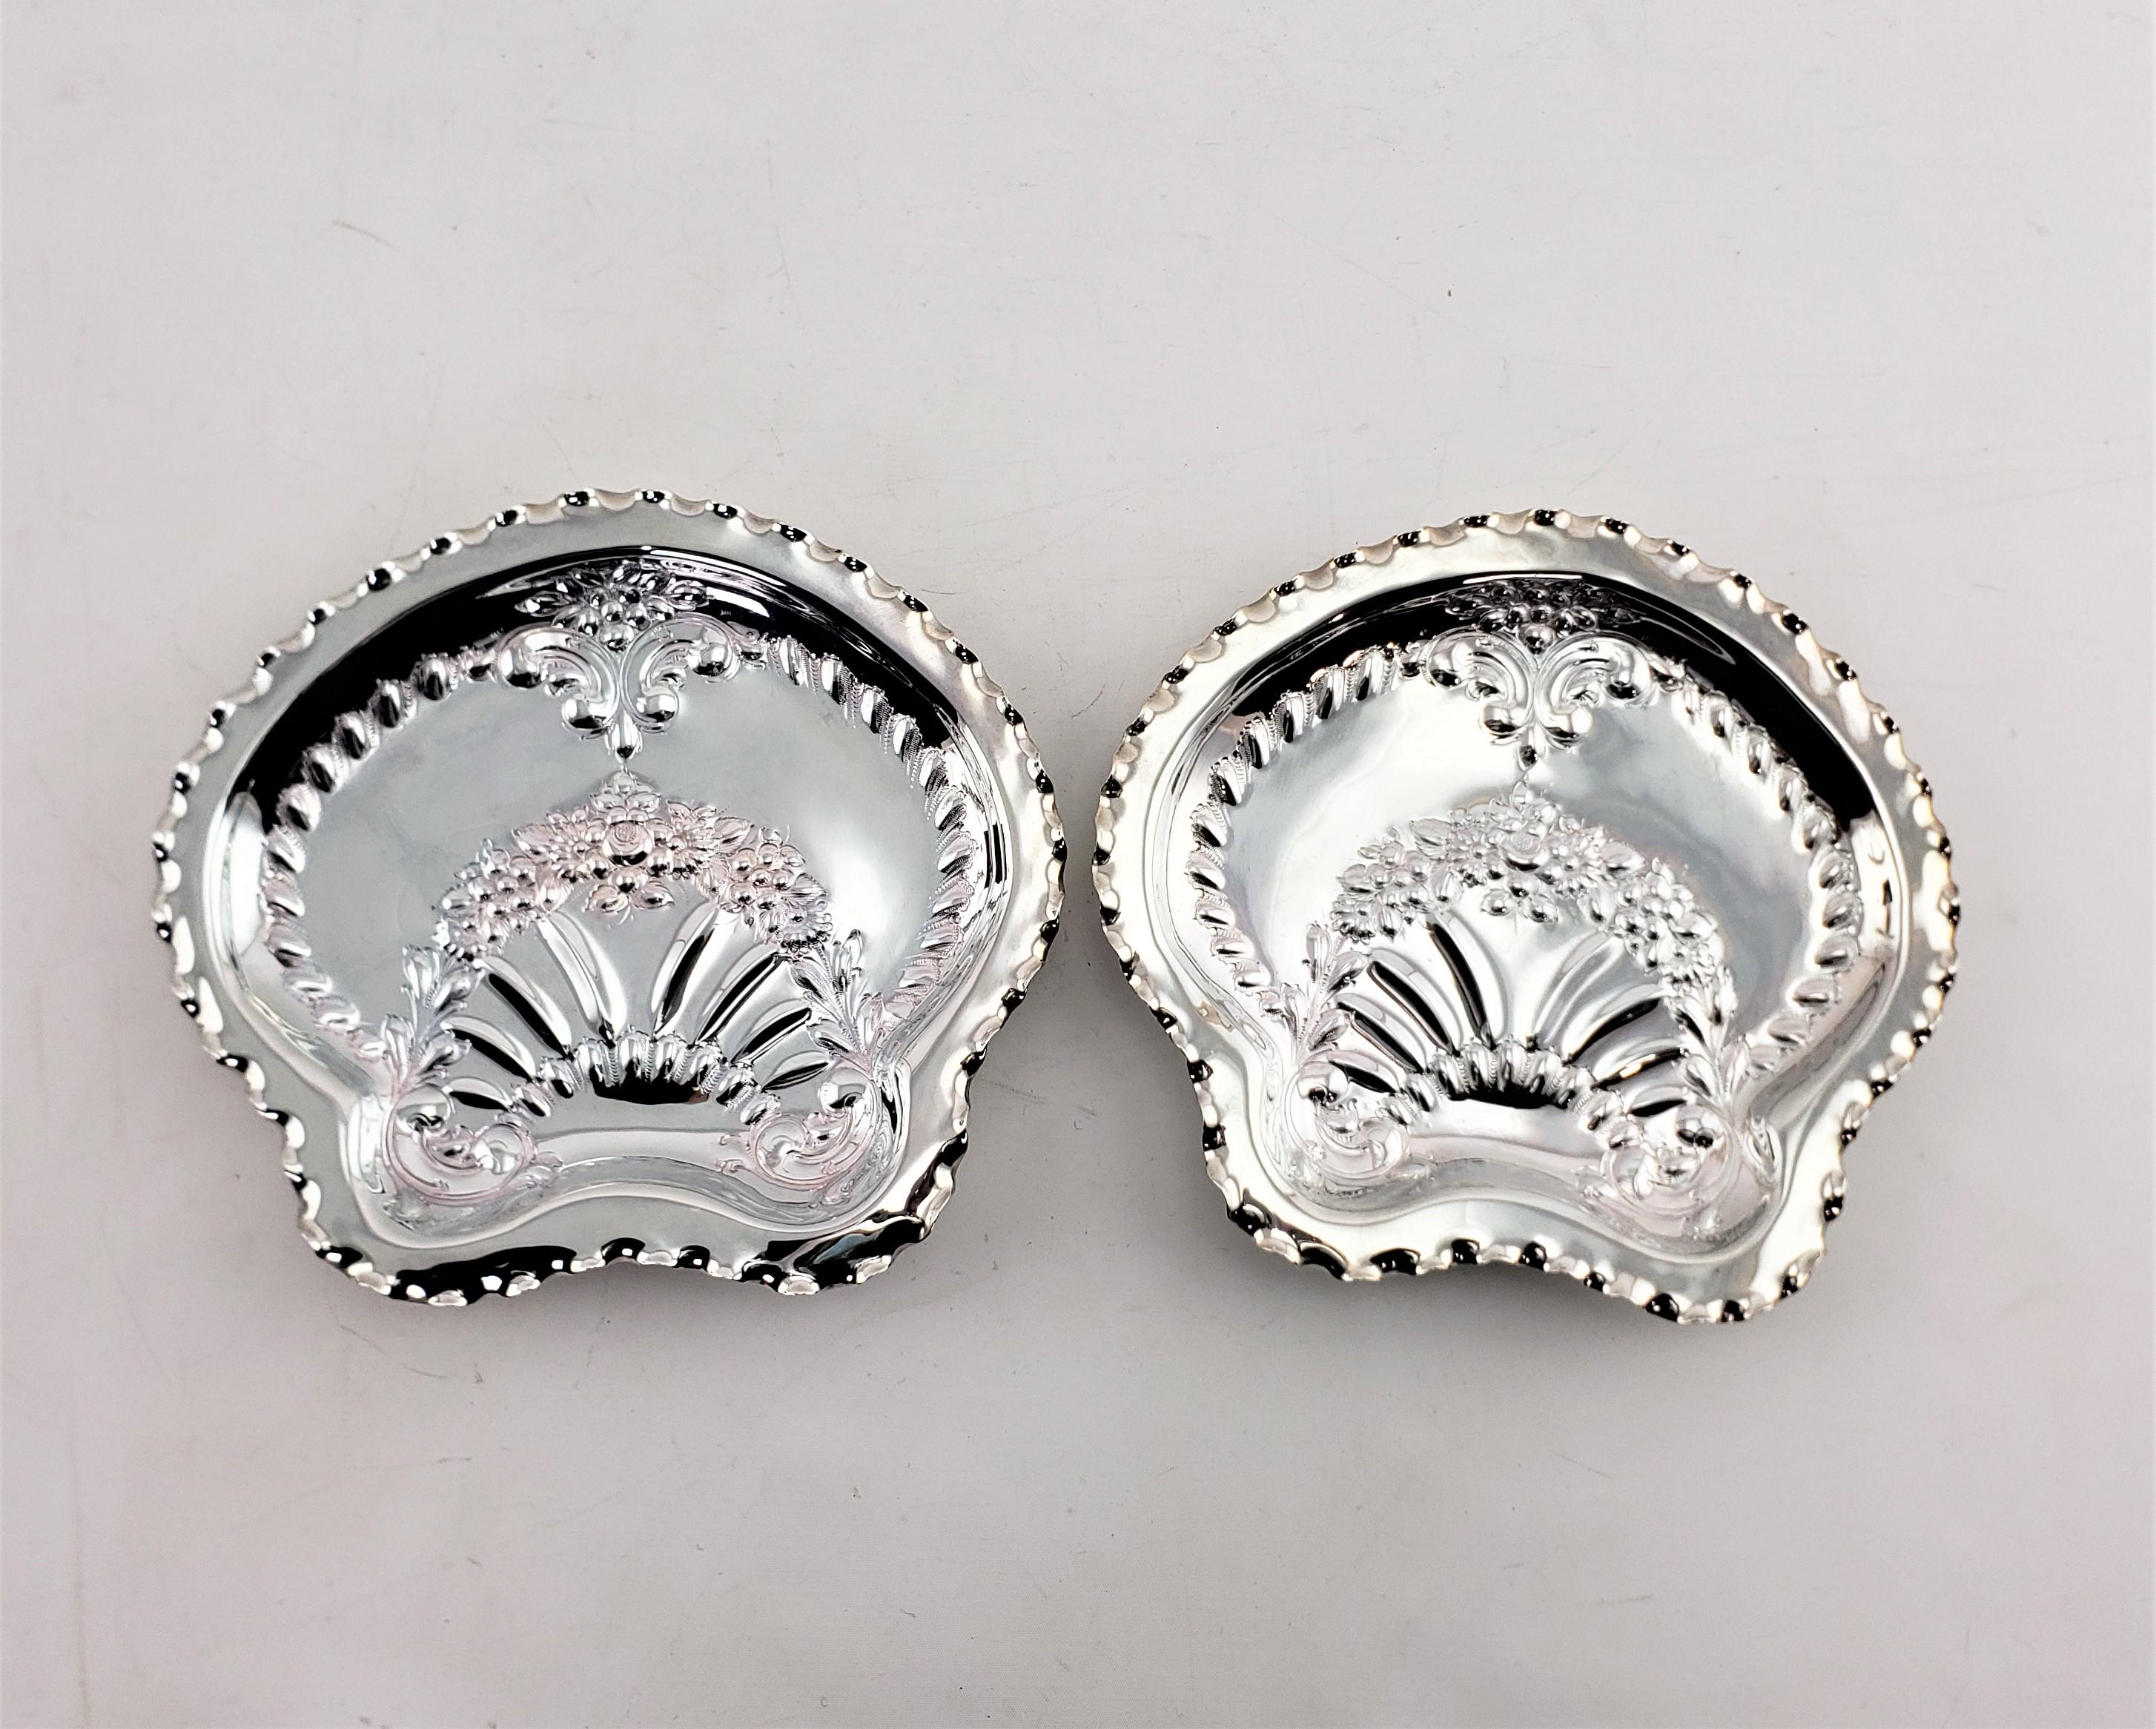 Antique English Silver Plated Strawberry Server Set with Figural Shell Dishes For Sale 5